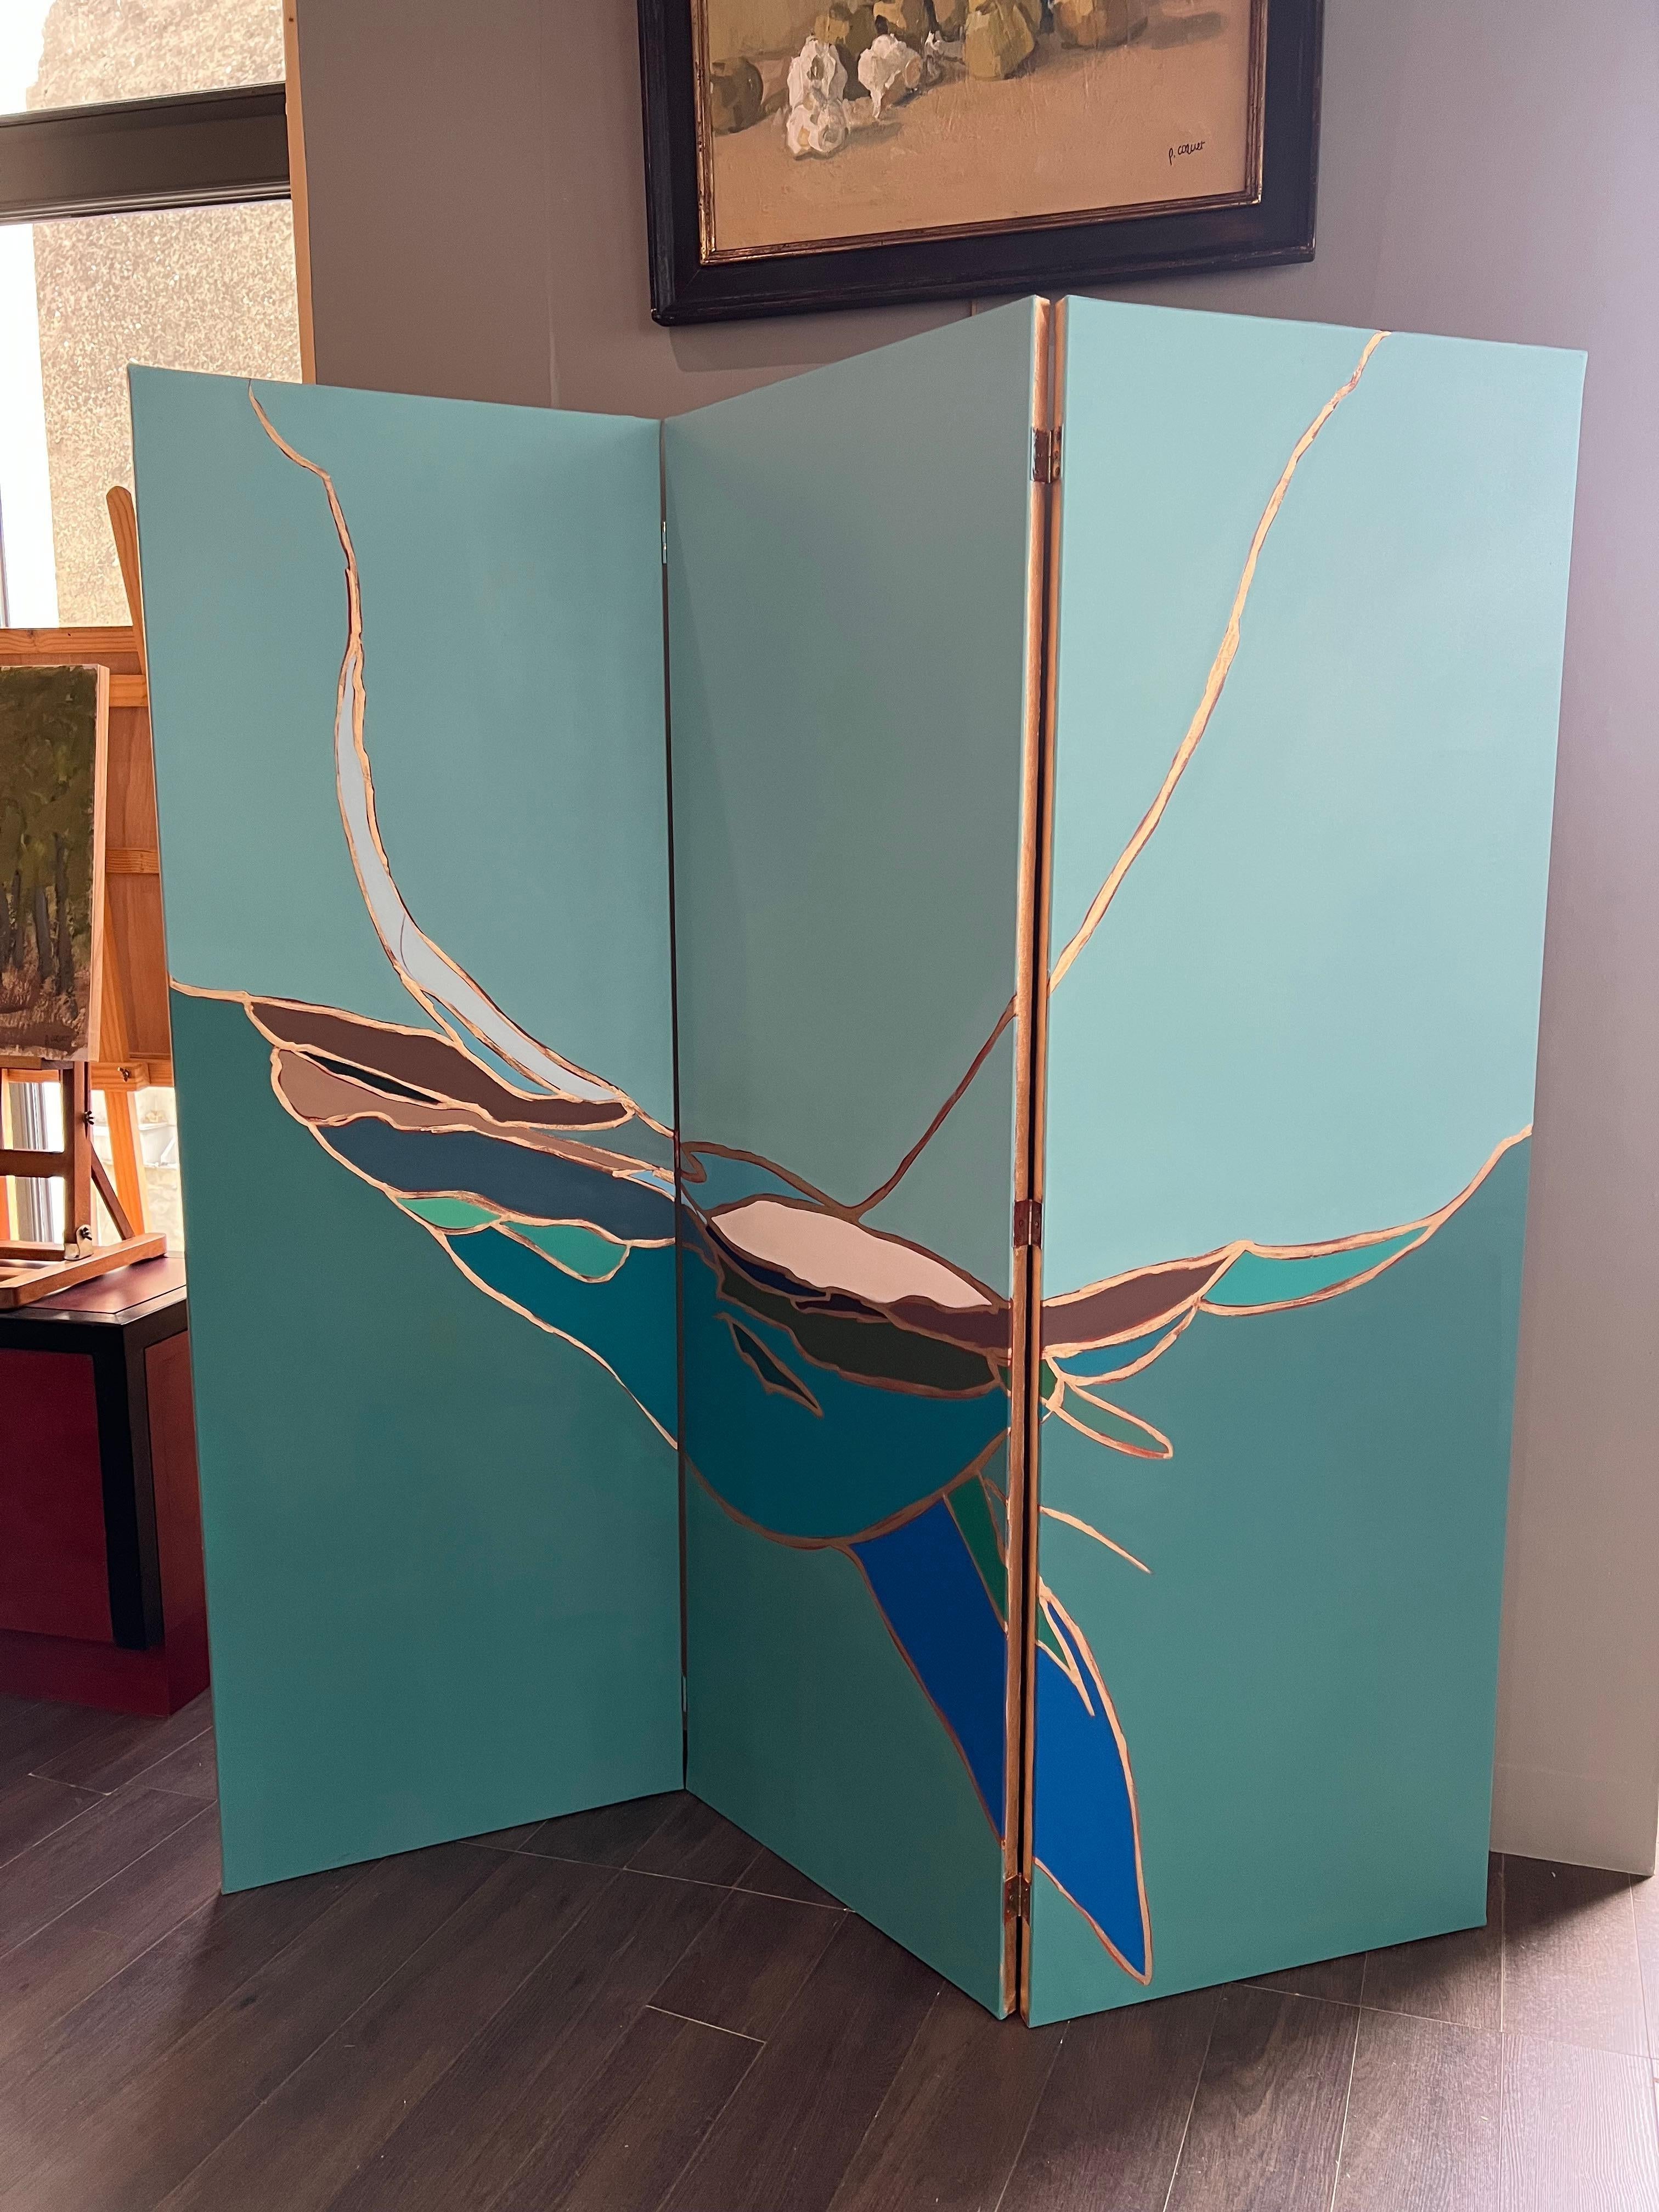 The Whale
Contemporary 3 leaves screen 50cm width (each) and 150 cm height
Oil and gold paint on canvas 
The screen stands upright and can also be hung like a painting, in a triptych. It can also be separated and framed in a floated oak frame. (see